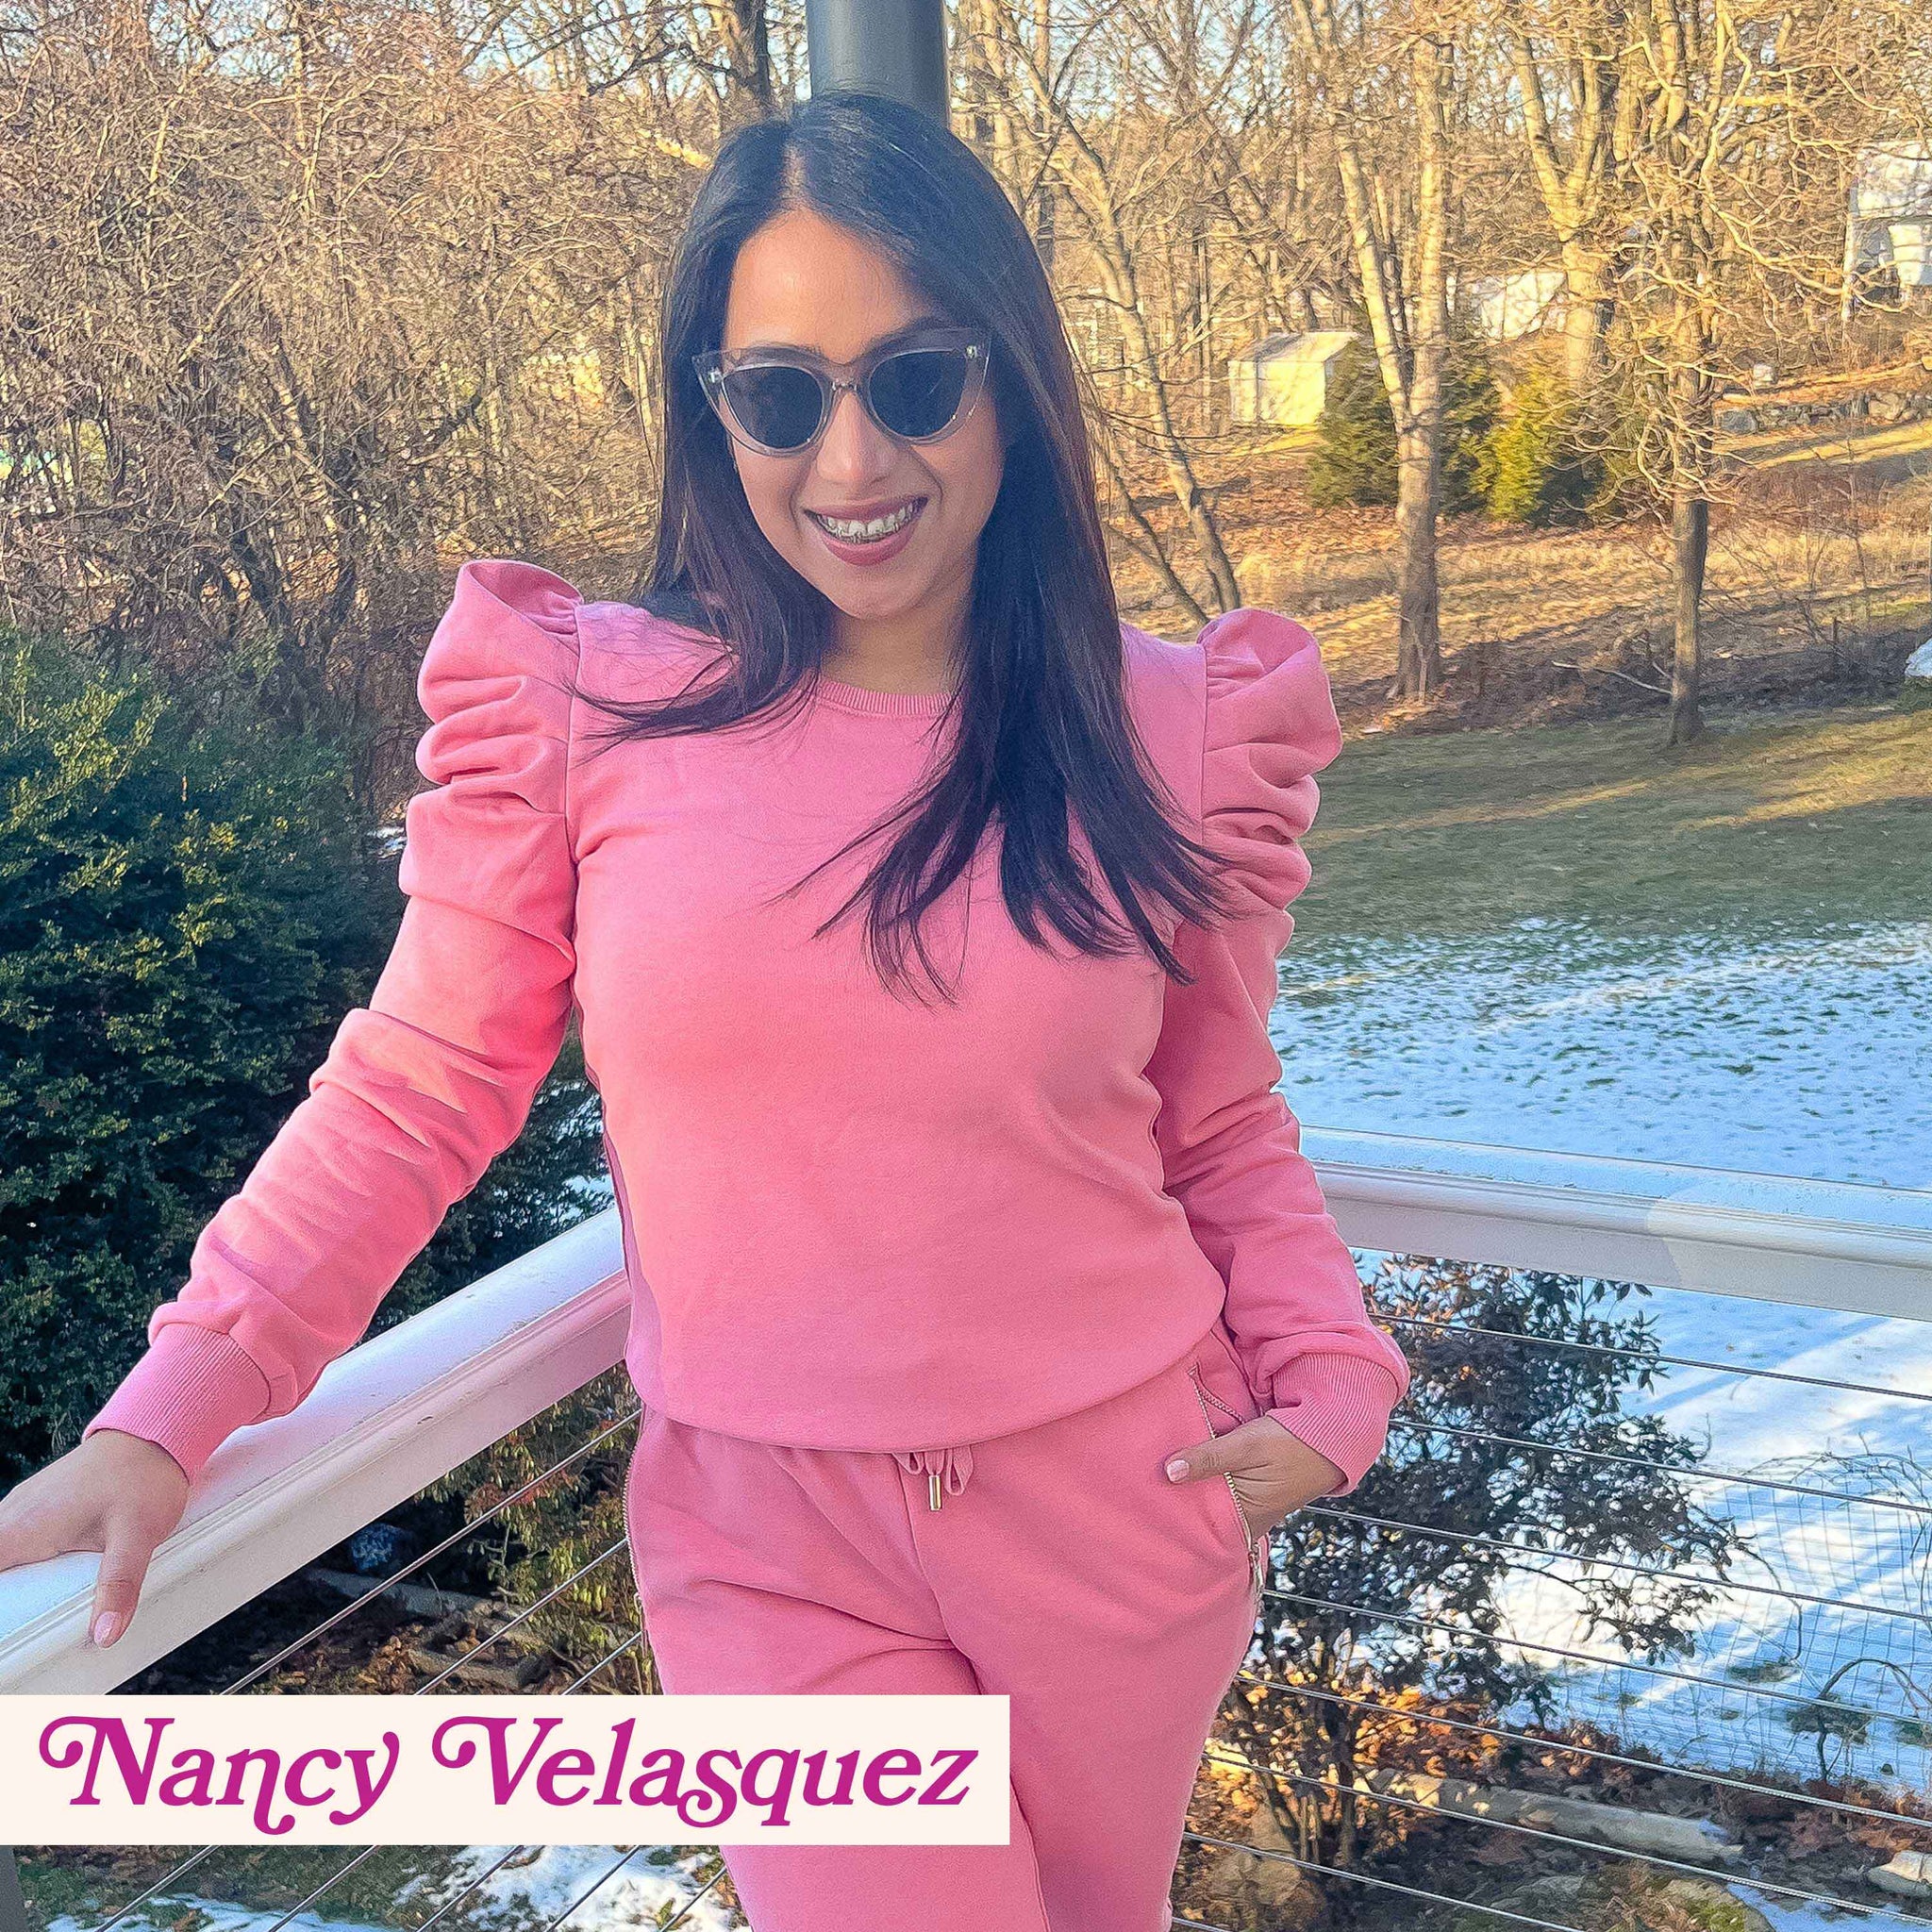 Nancy wears The Happily Eva After Collection Tallulah Sweatpants